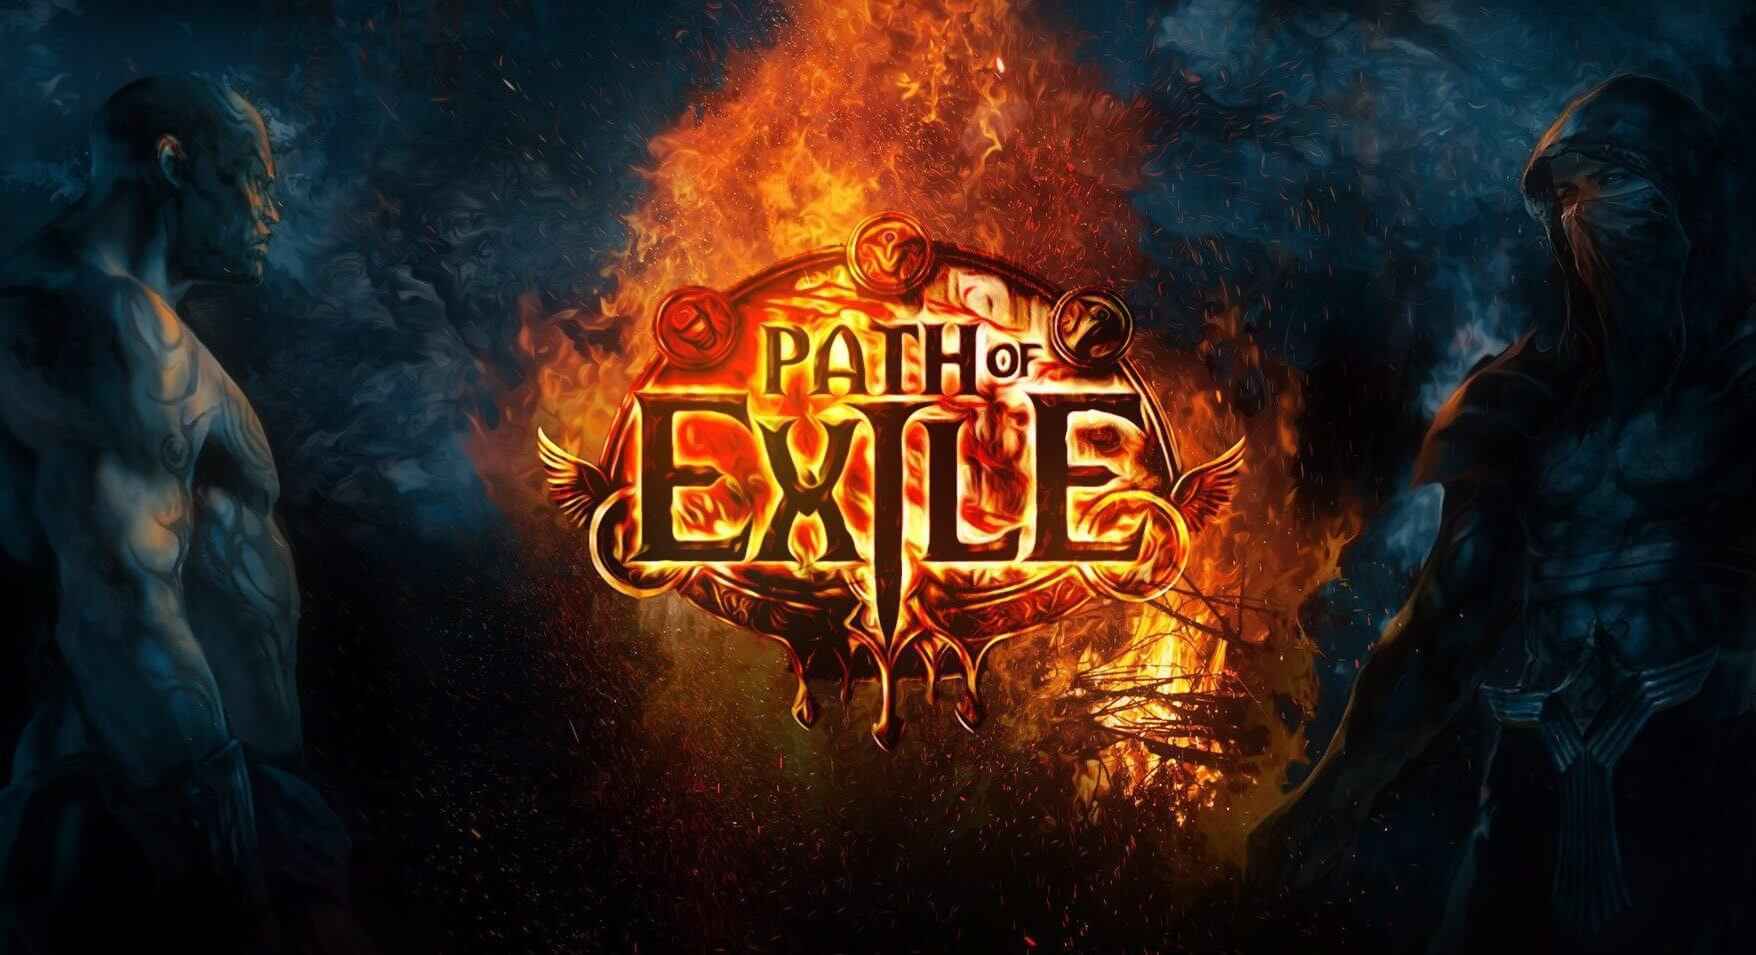 Path of Exile Update 1.41 (3.10.0ré) Now Available, Full Patch Notes Inside